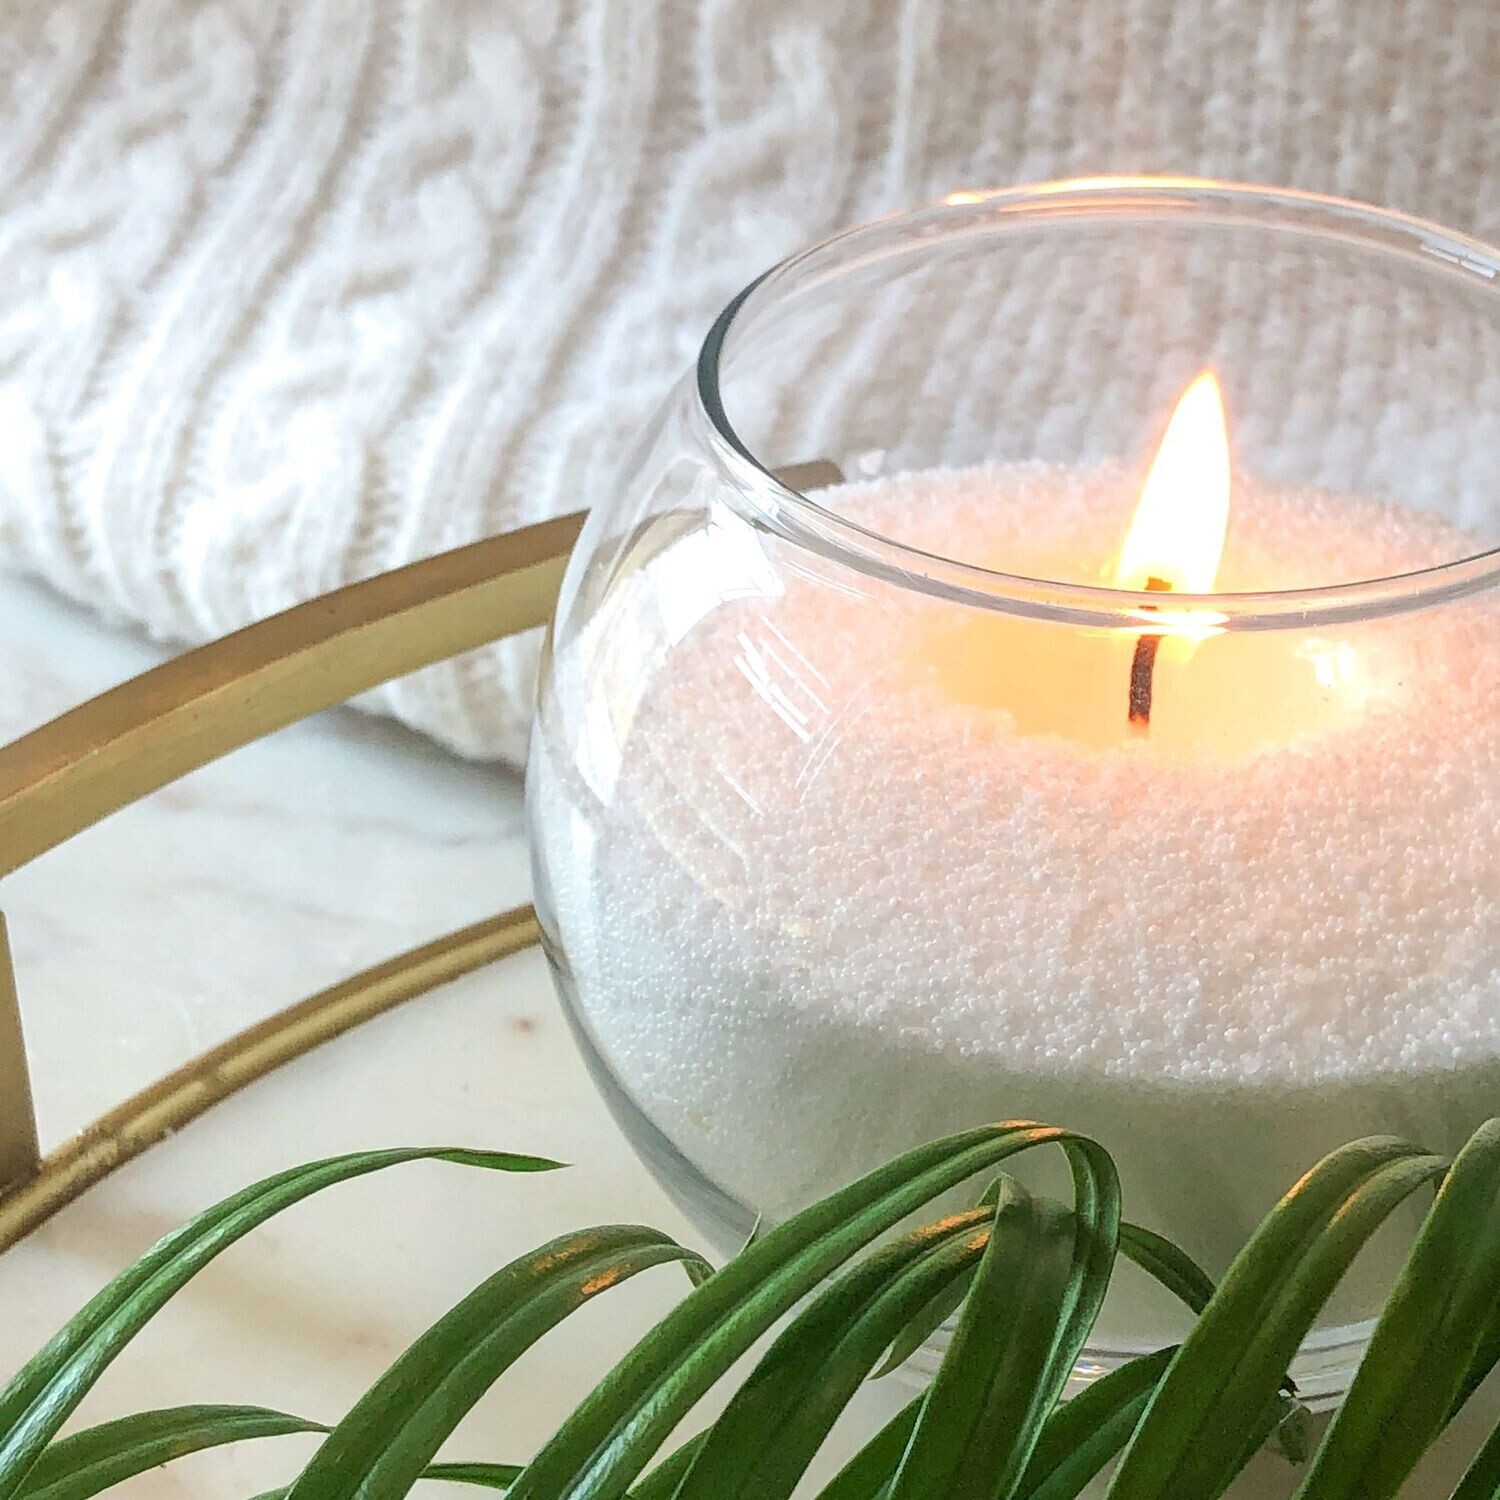 Foton® Pearled Candle - Zesty Zen